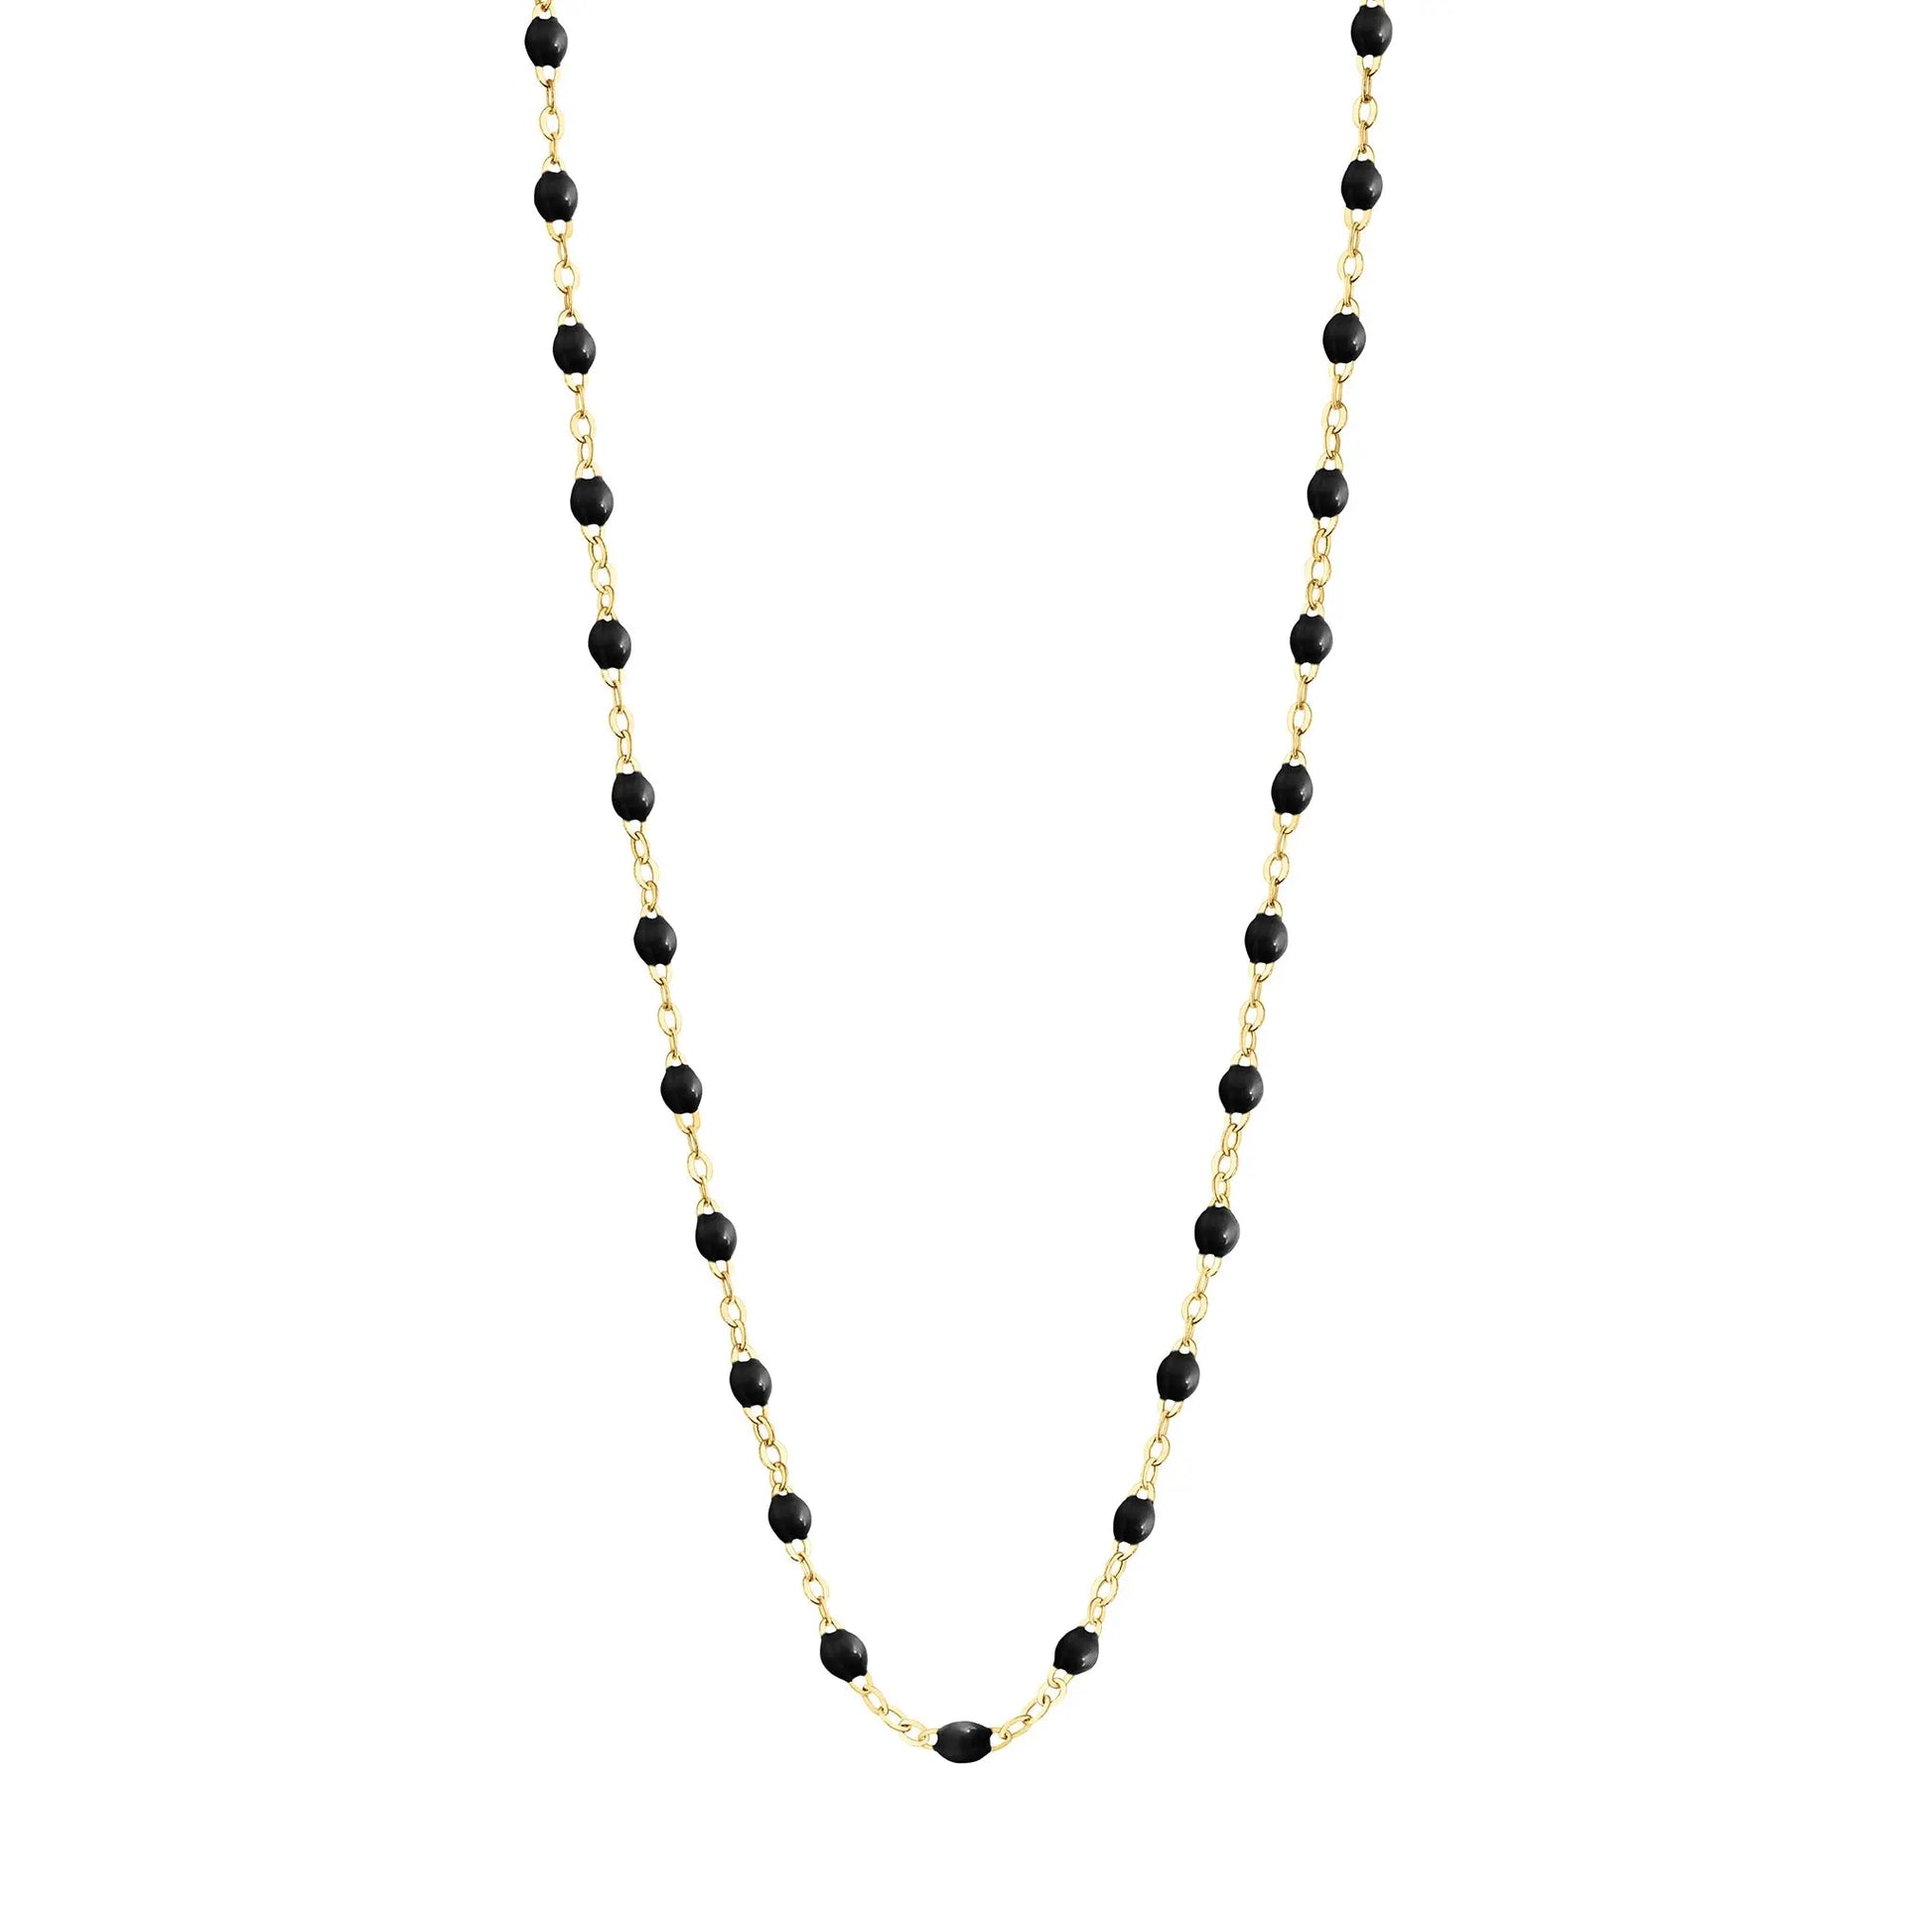 Stack you necklace layers with this versatile beaded chain! The Classic Gigi Necklace by gigi CLOZEAU features 18 carat yellow gold, and striking Black resin jewels for an everyday effortless appearance. Handcrafted in 18k yellow gold. The beads measure 1.50mm in diameter and is finished with a spring ring clasp. The length is 19.7 inches.